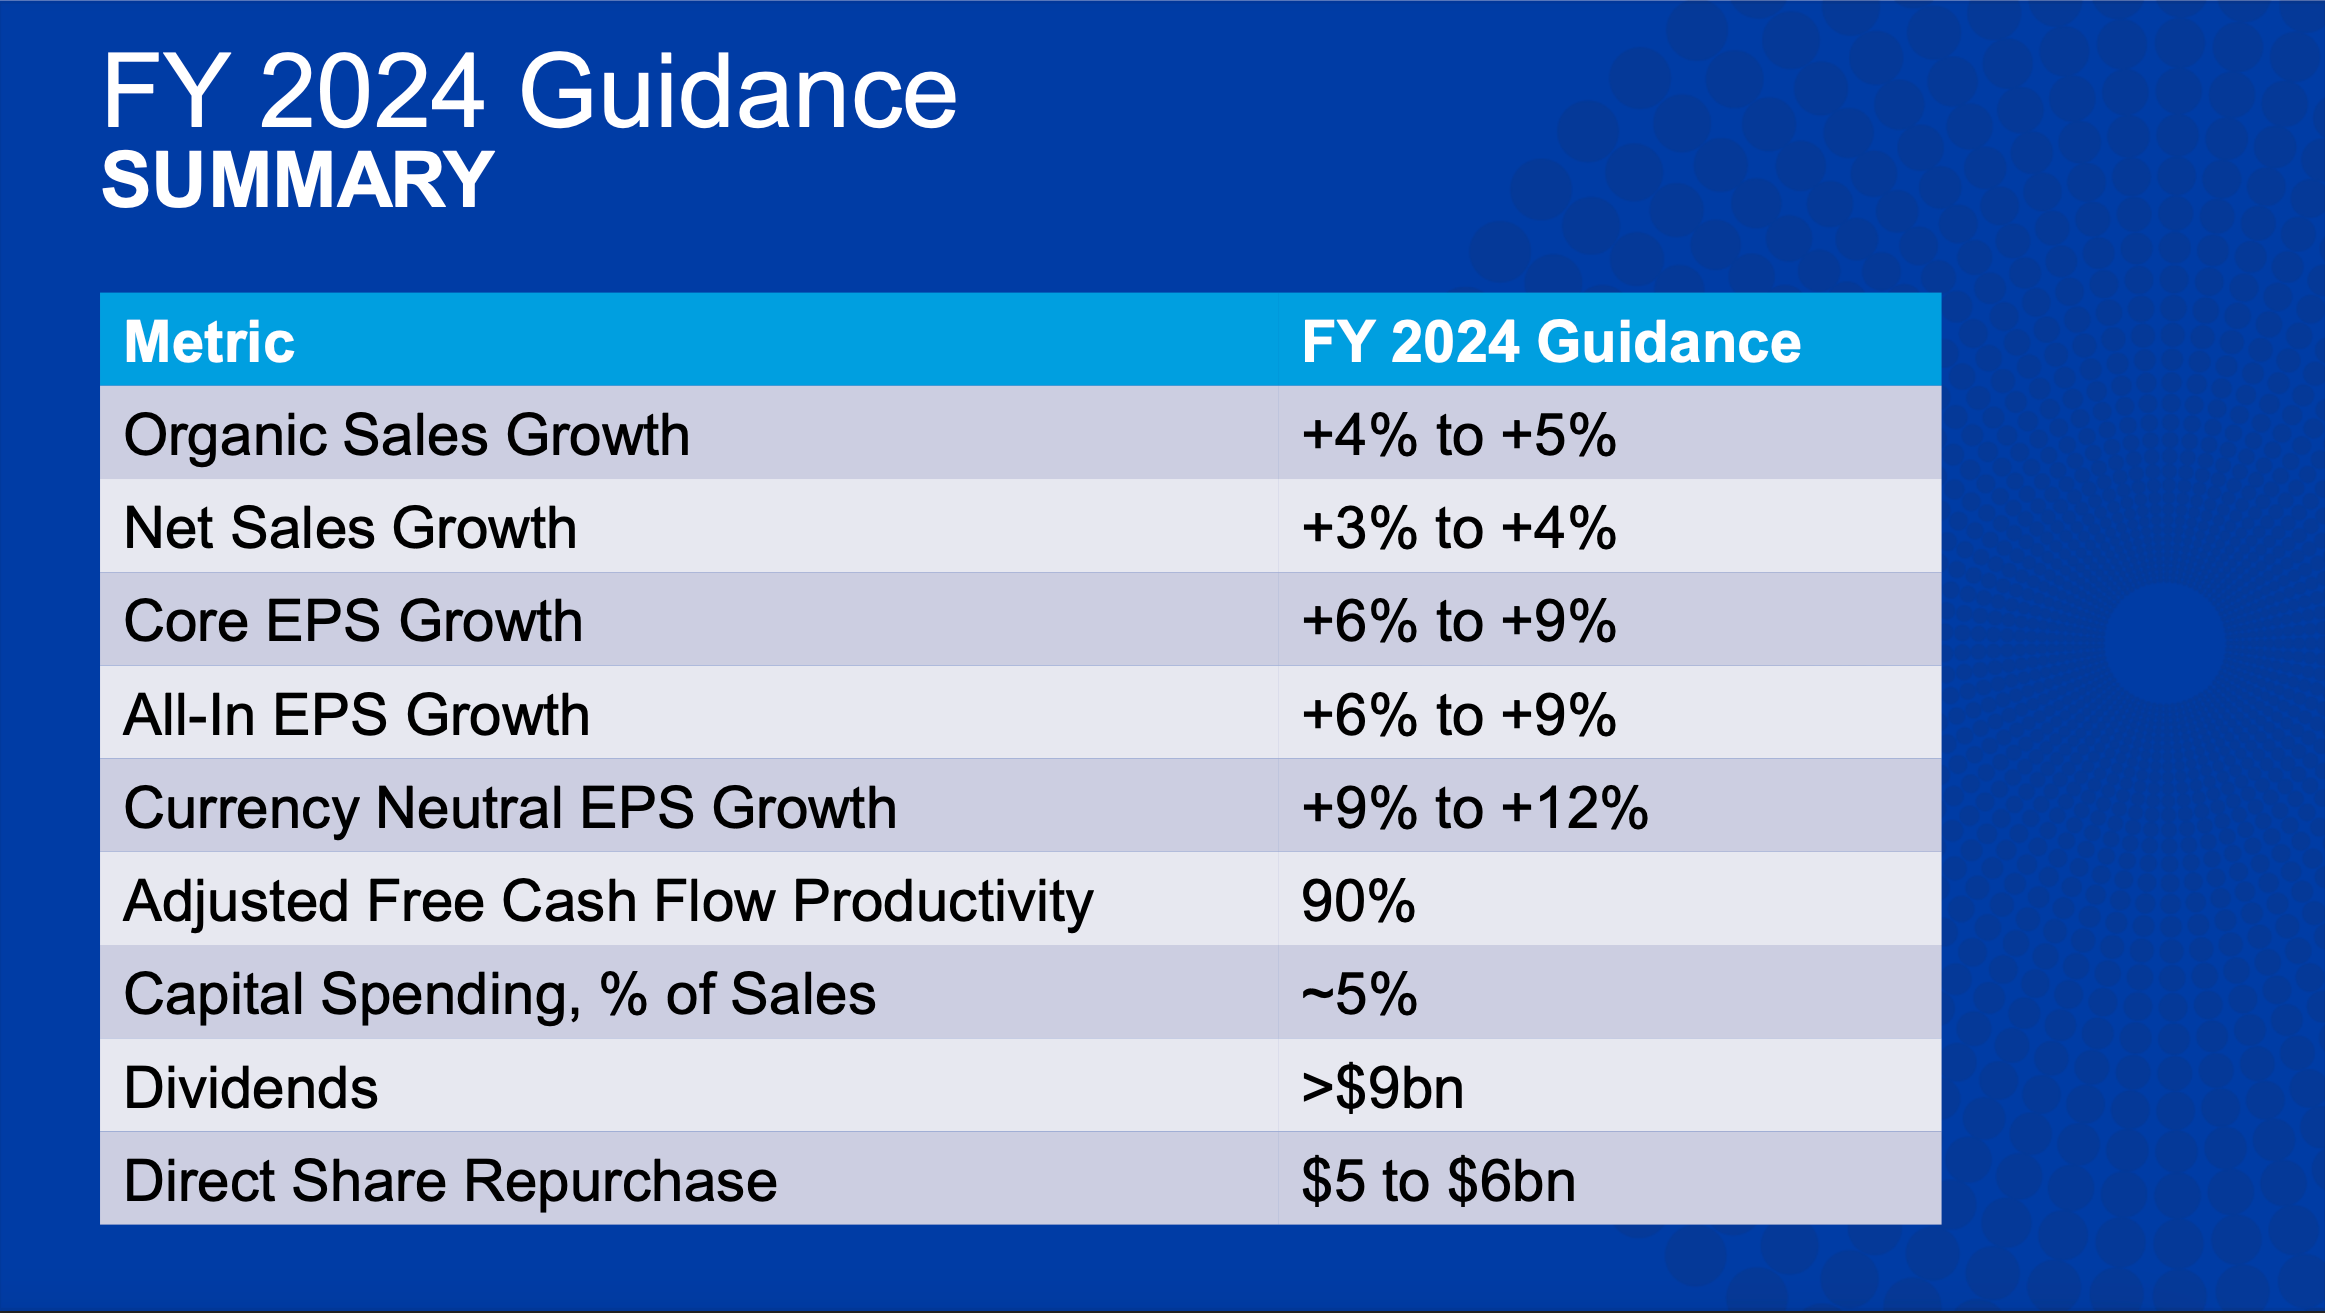 P&G's uneventful quarter, guidance overshadows compelling execution